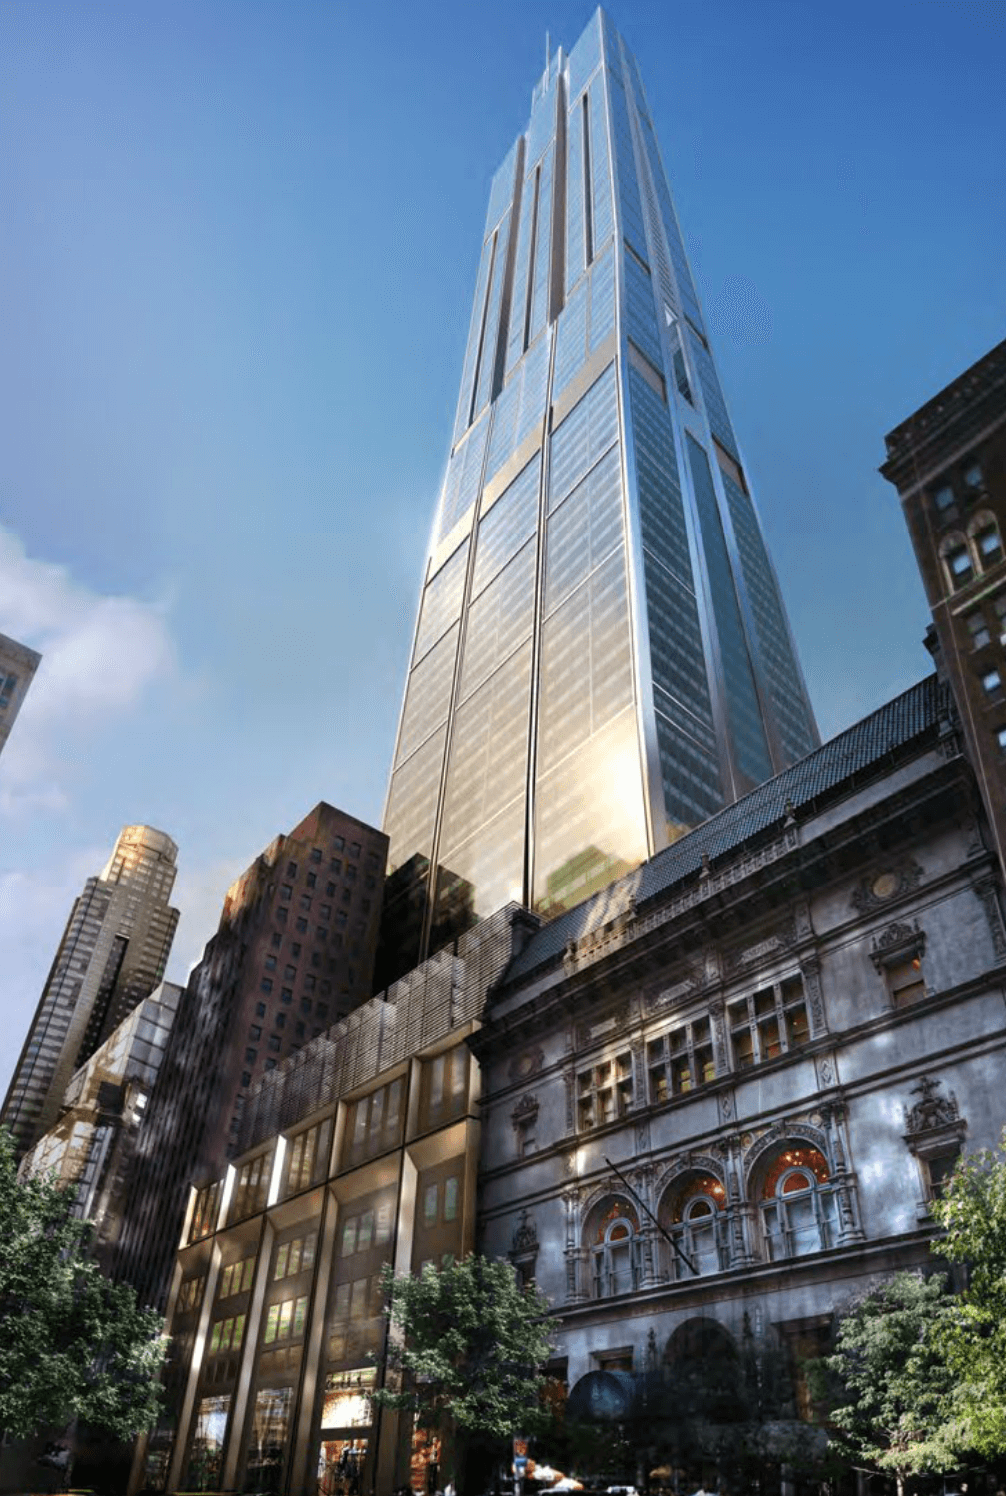 Foster's 217 West 57th Street/Nordstrom Tower